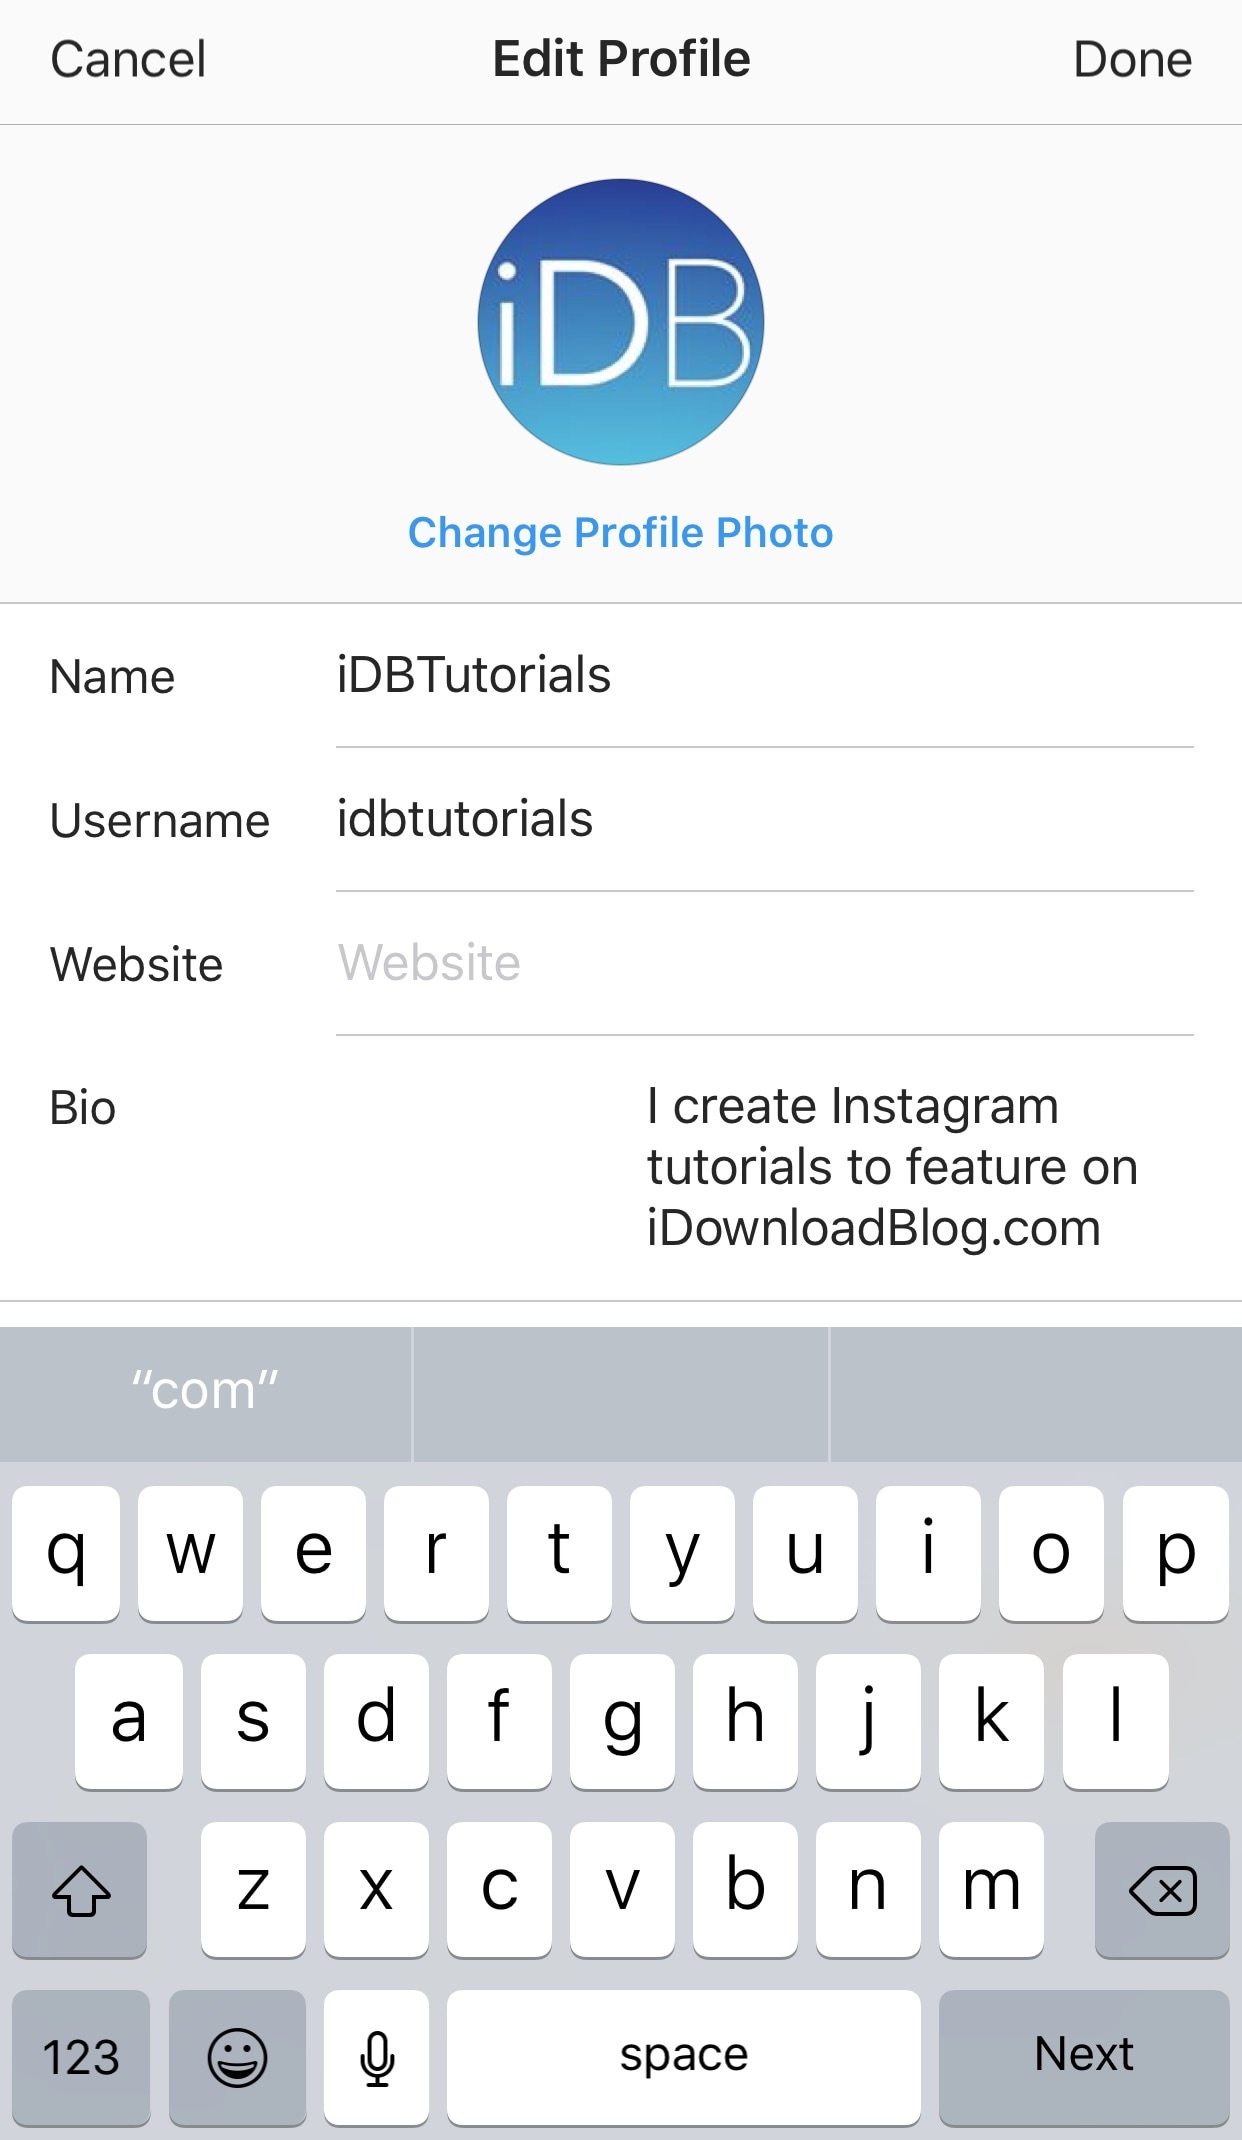 How to Craft the Best Instagram Bios for Businesses